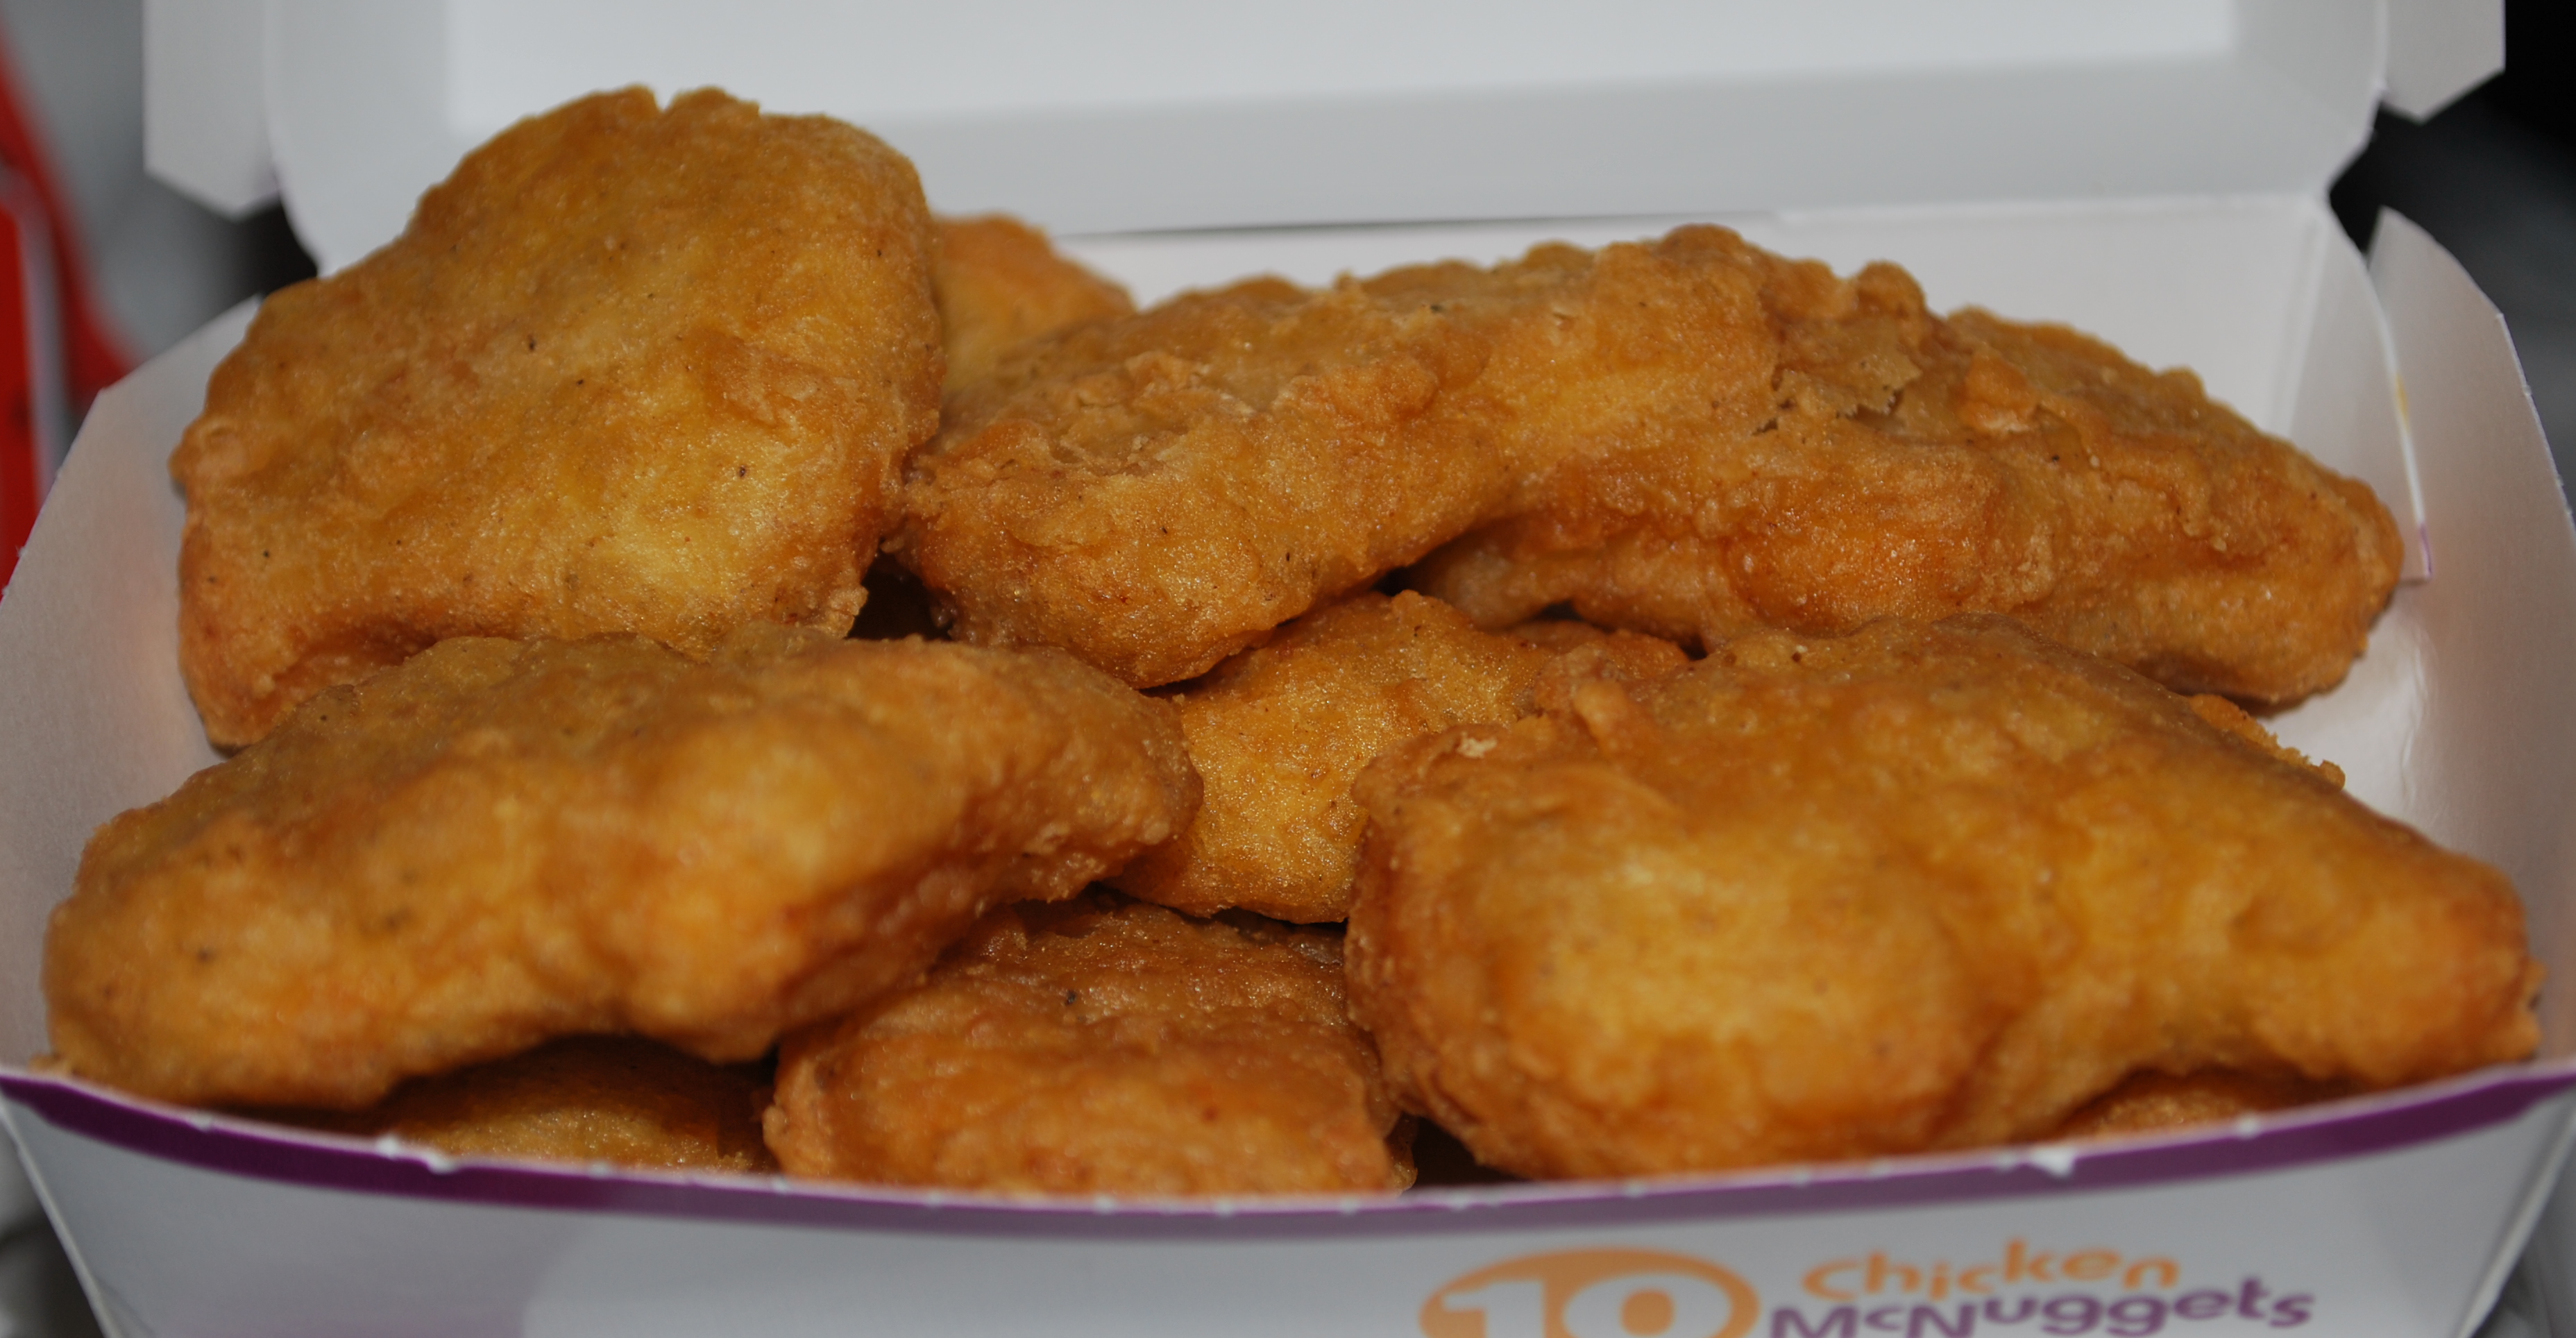 File:Chicken nuggets  - Wikimedia Commons